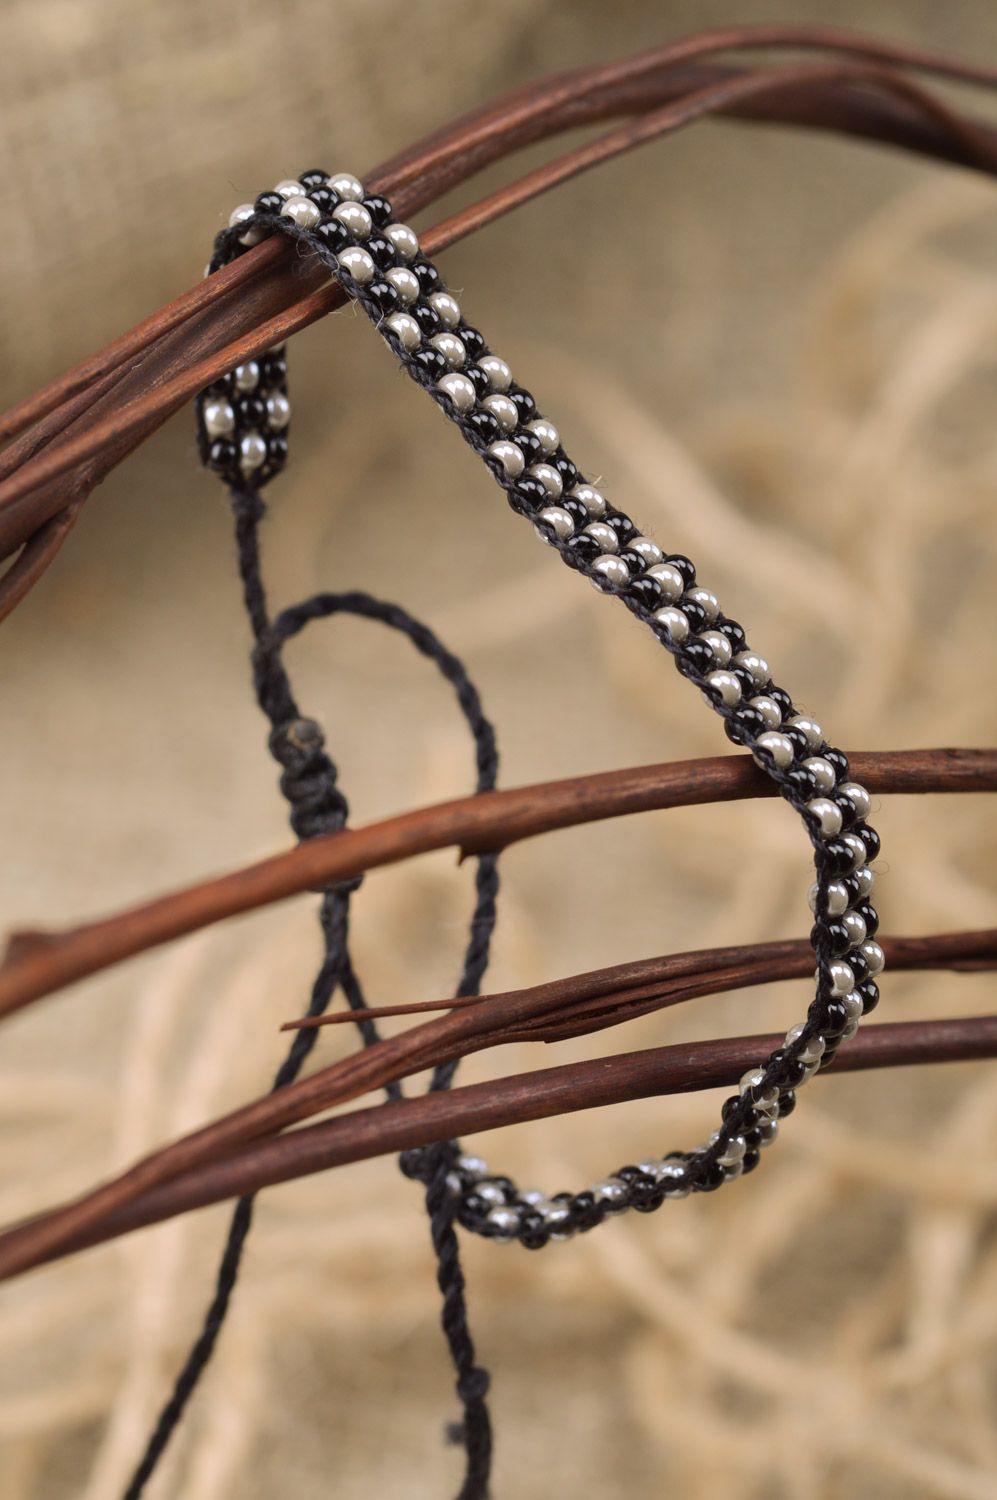 Handmade wrist bracelet woven of black and nacre beads with ties for women photo 1